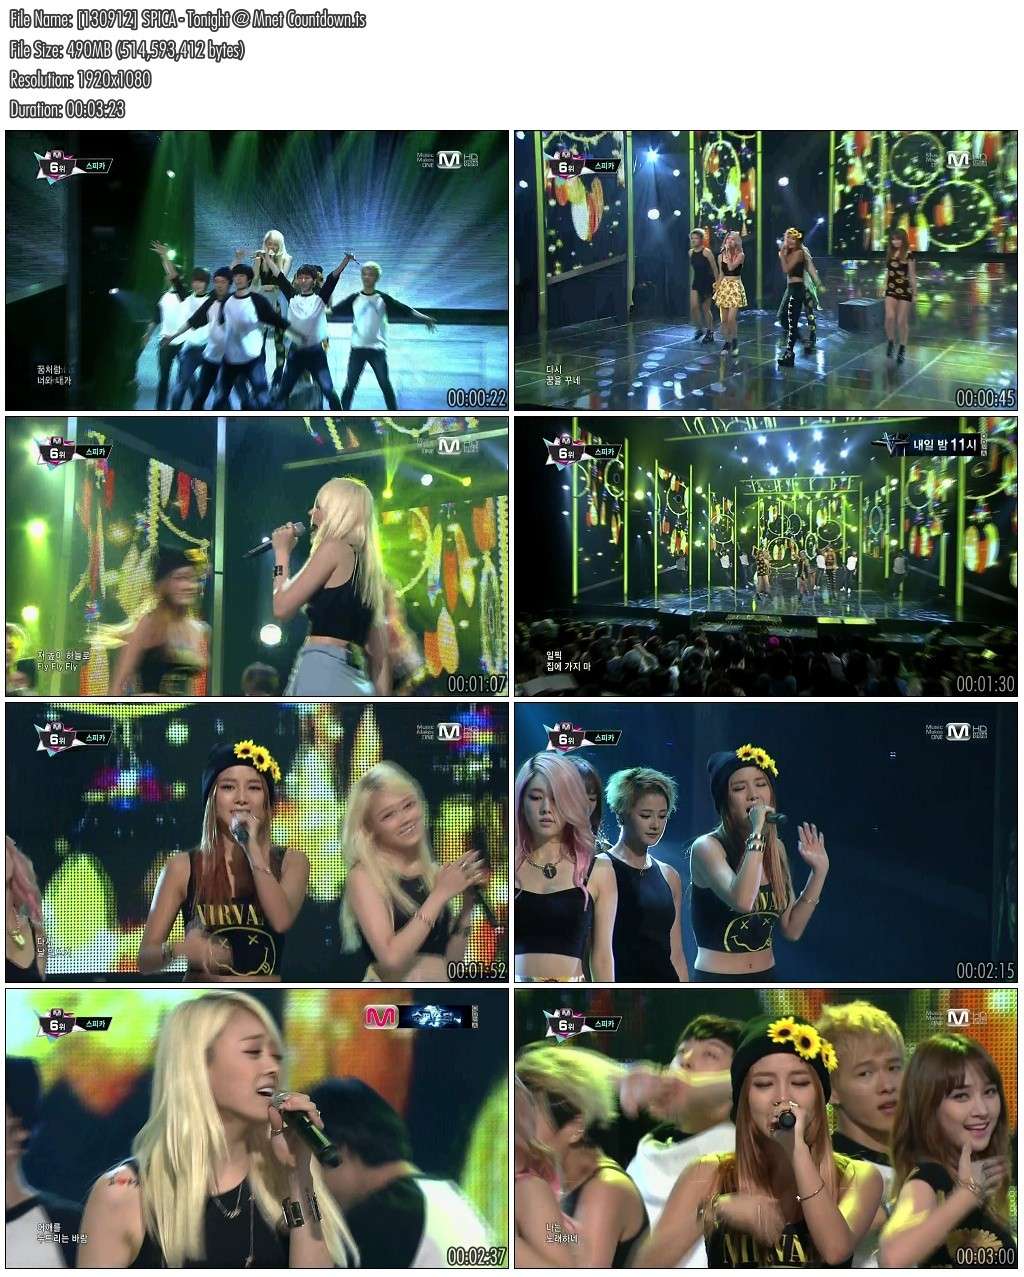 [130912] SPICA - Tonight @ Mnet Countdown 13091210